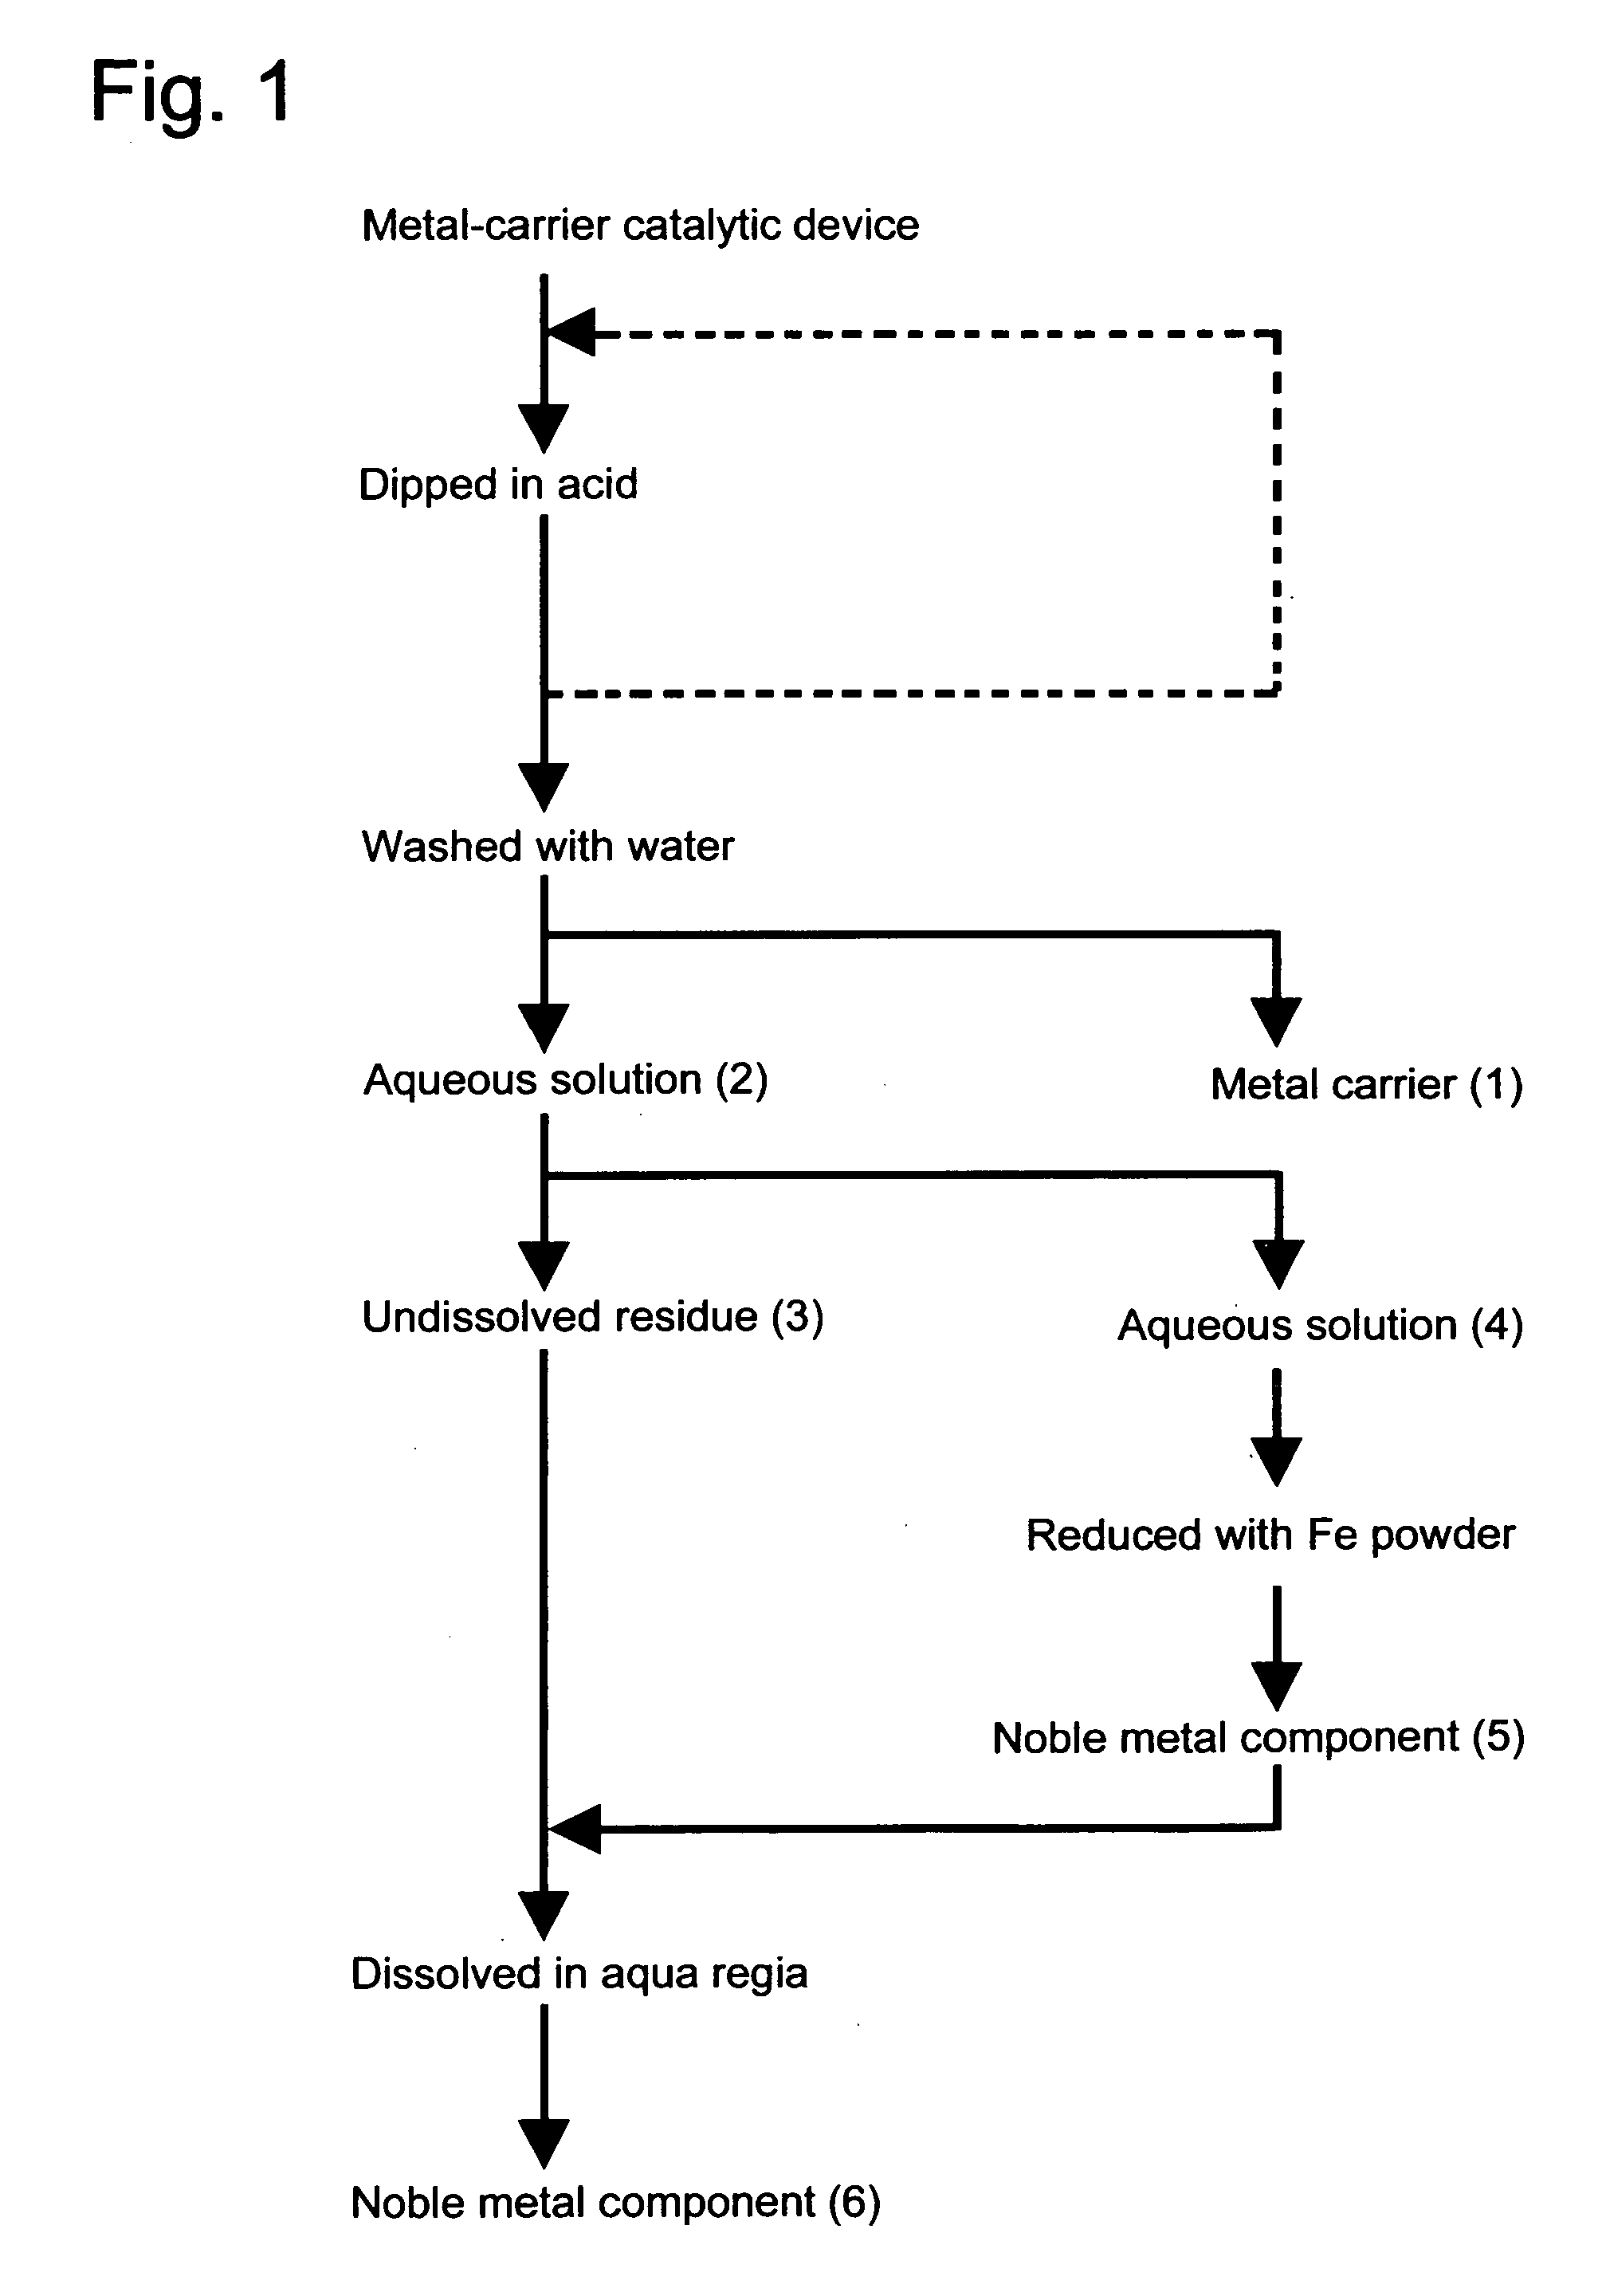 Method for recovering noble metals from metallic carrier catalytic device